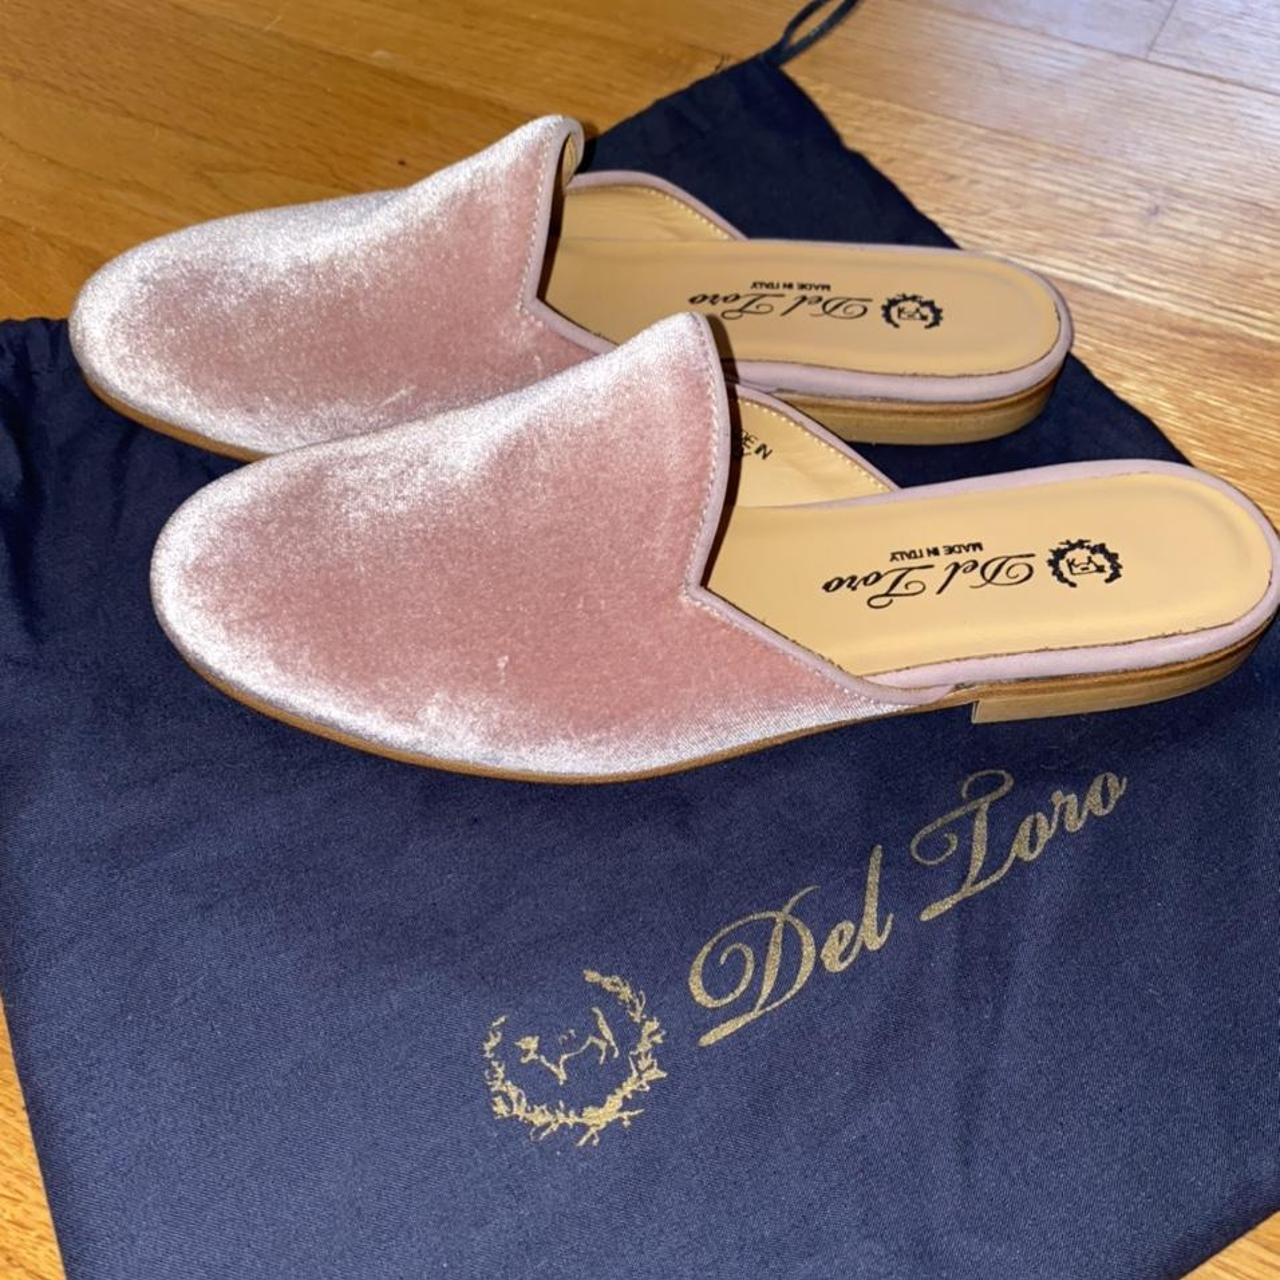 Product Image 1 - Del Toro pink house slippers.